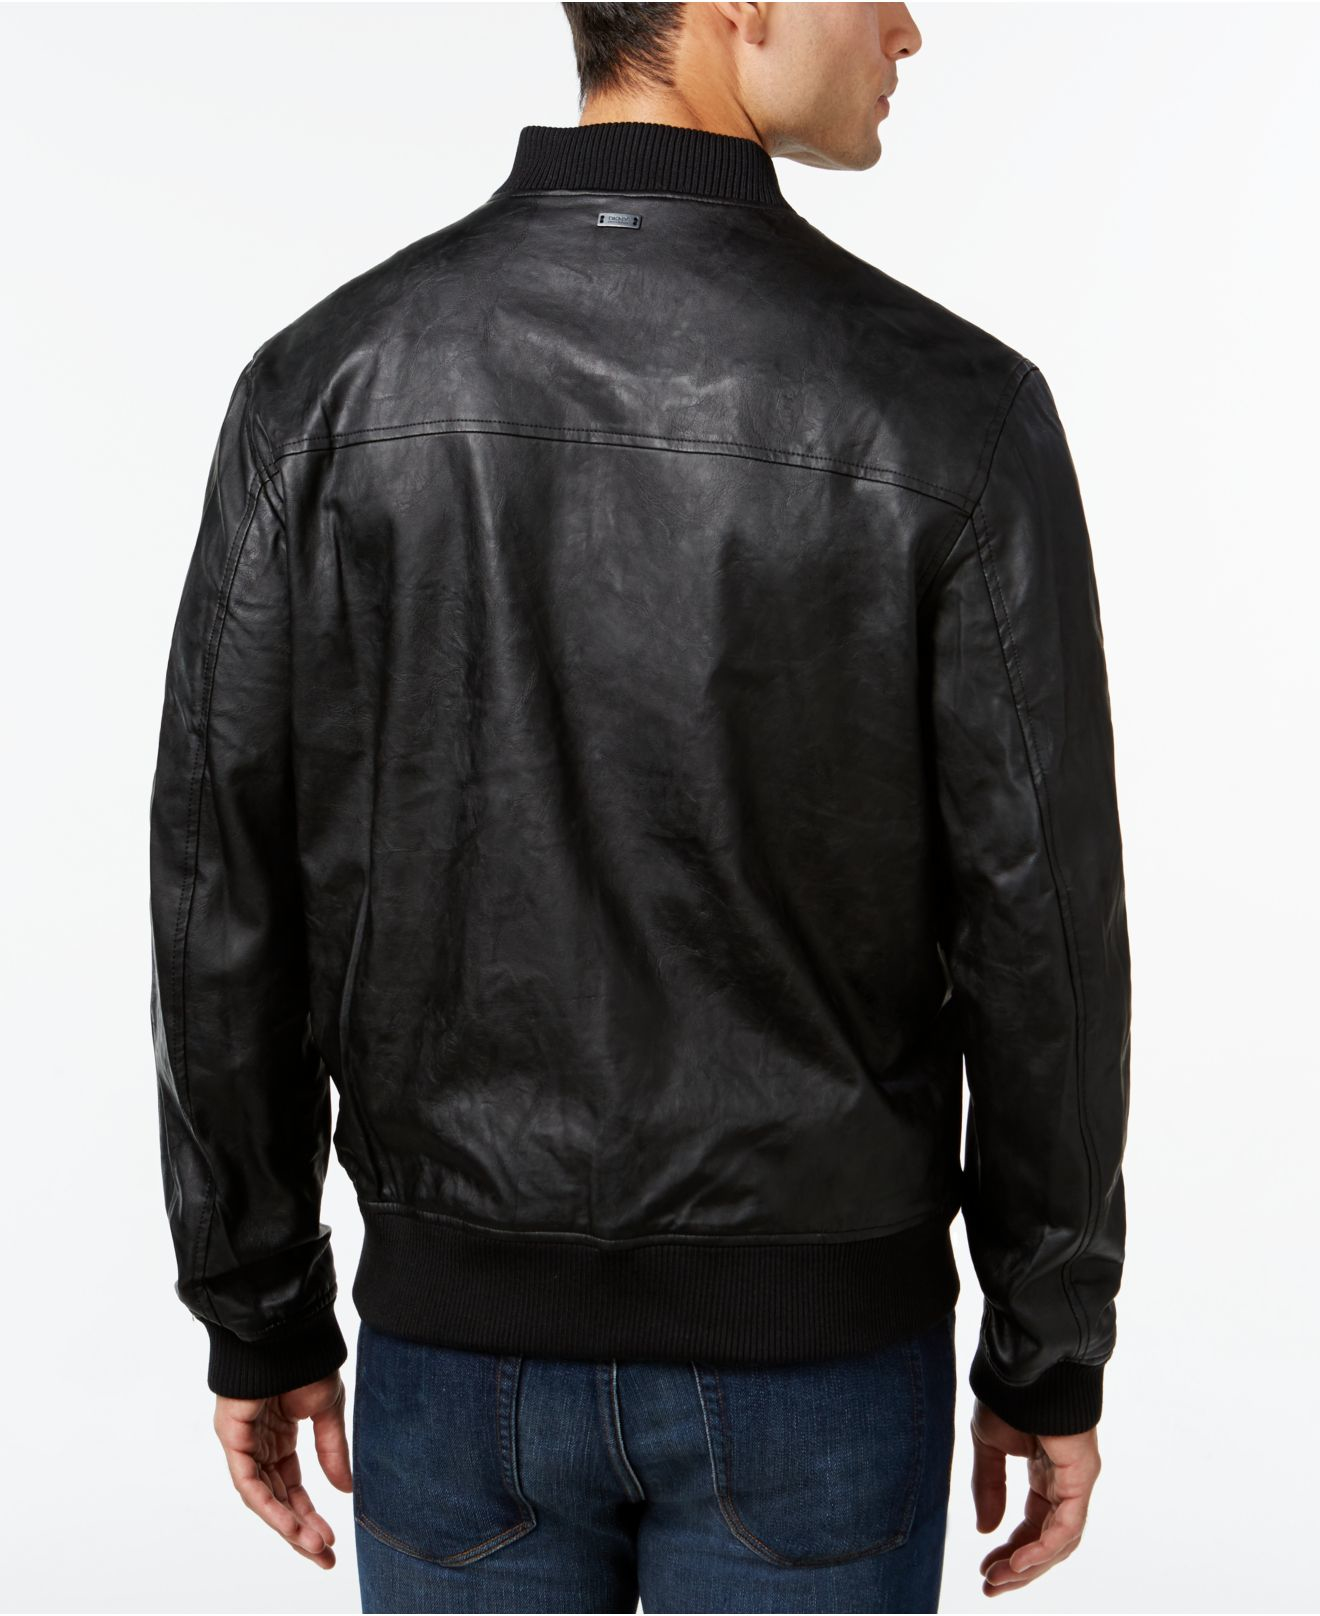 Lyst - Dkny Faux-leather Bomber Jacket in Black for Men